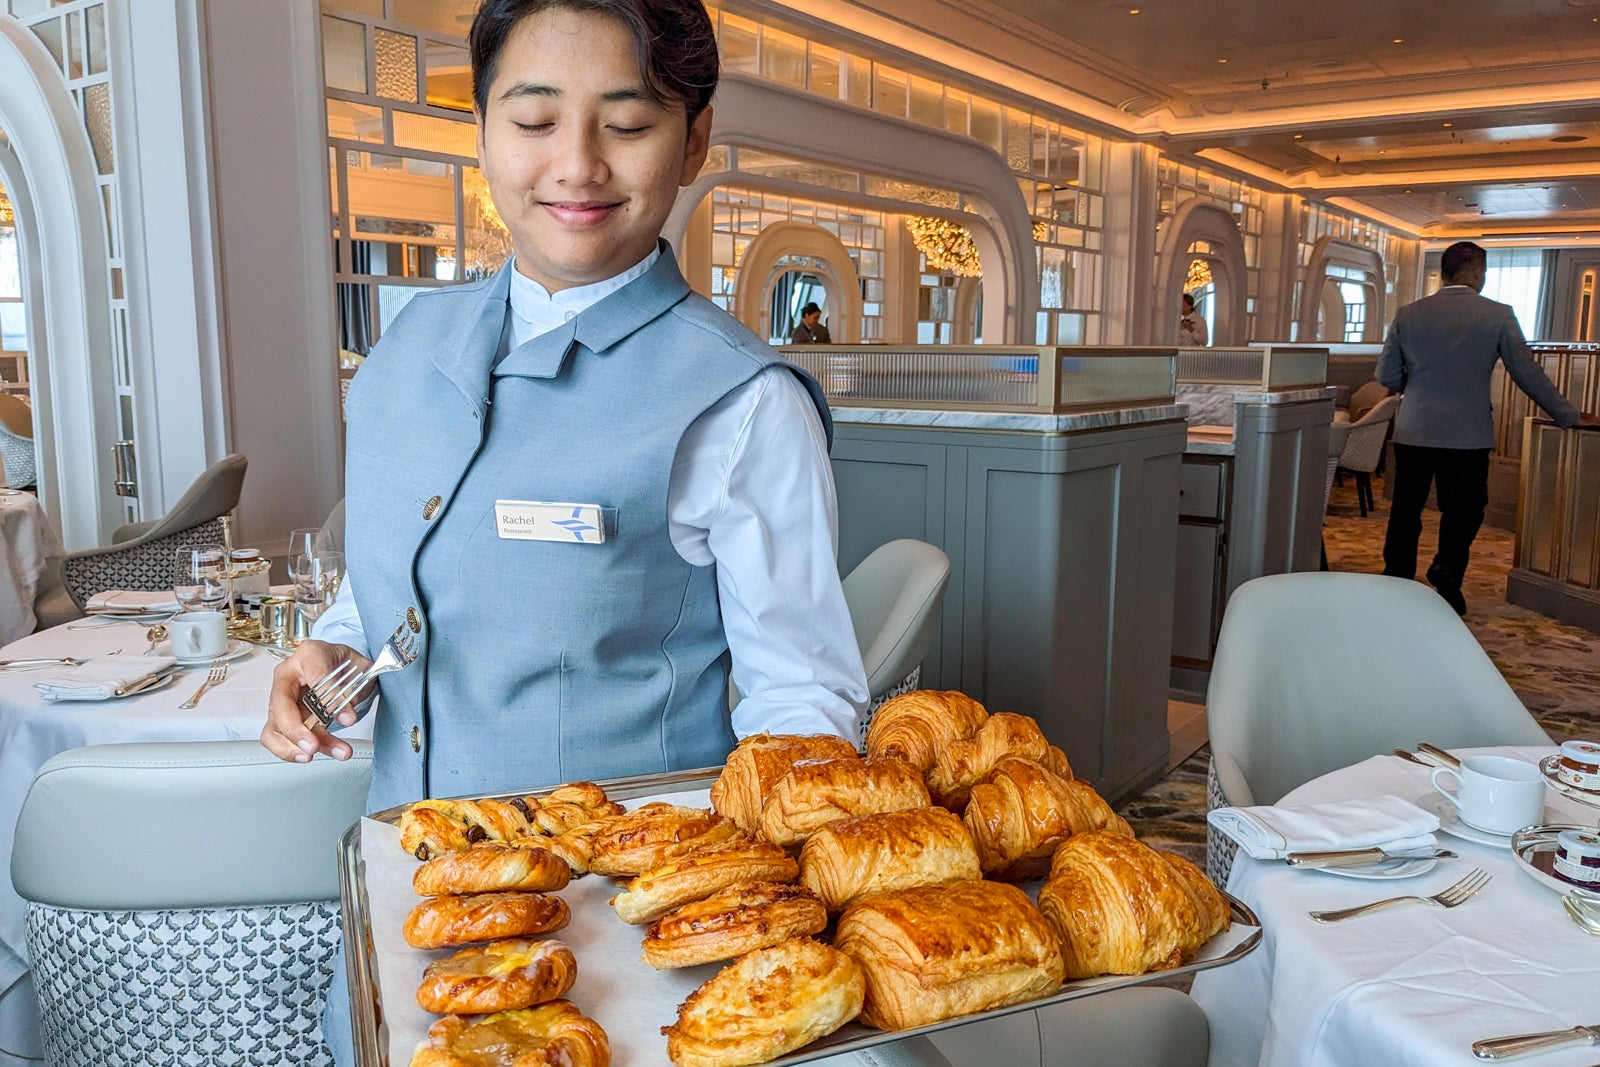 Waiter presenting tray of breakfast pastries